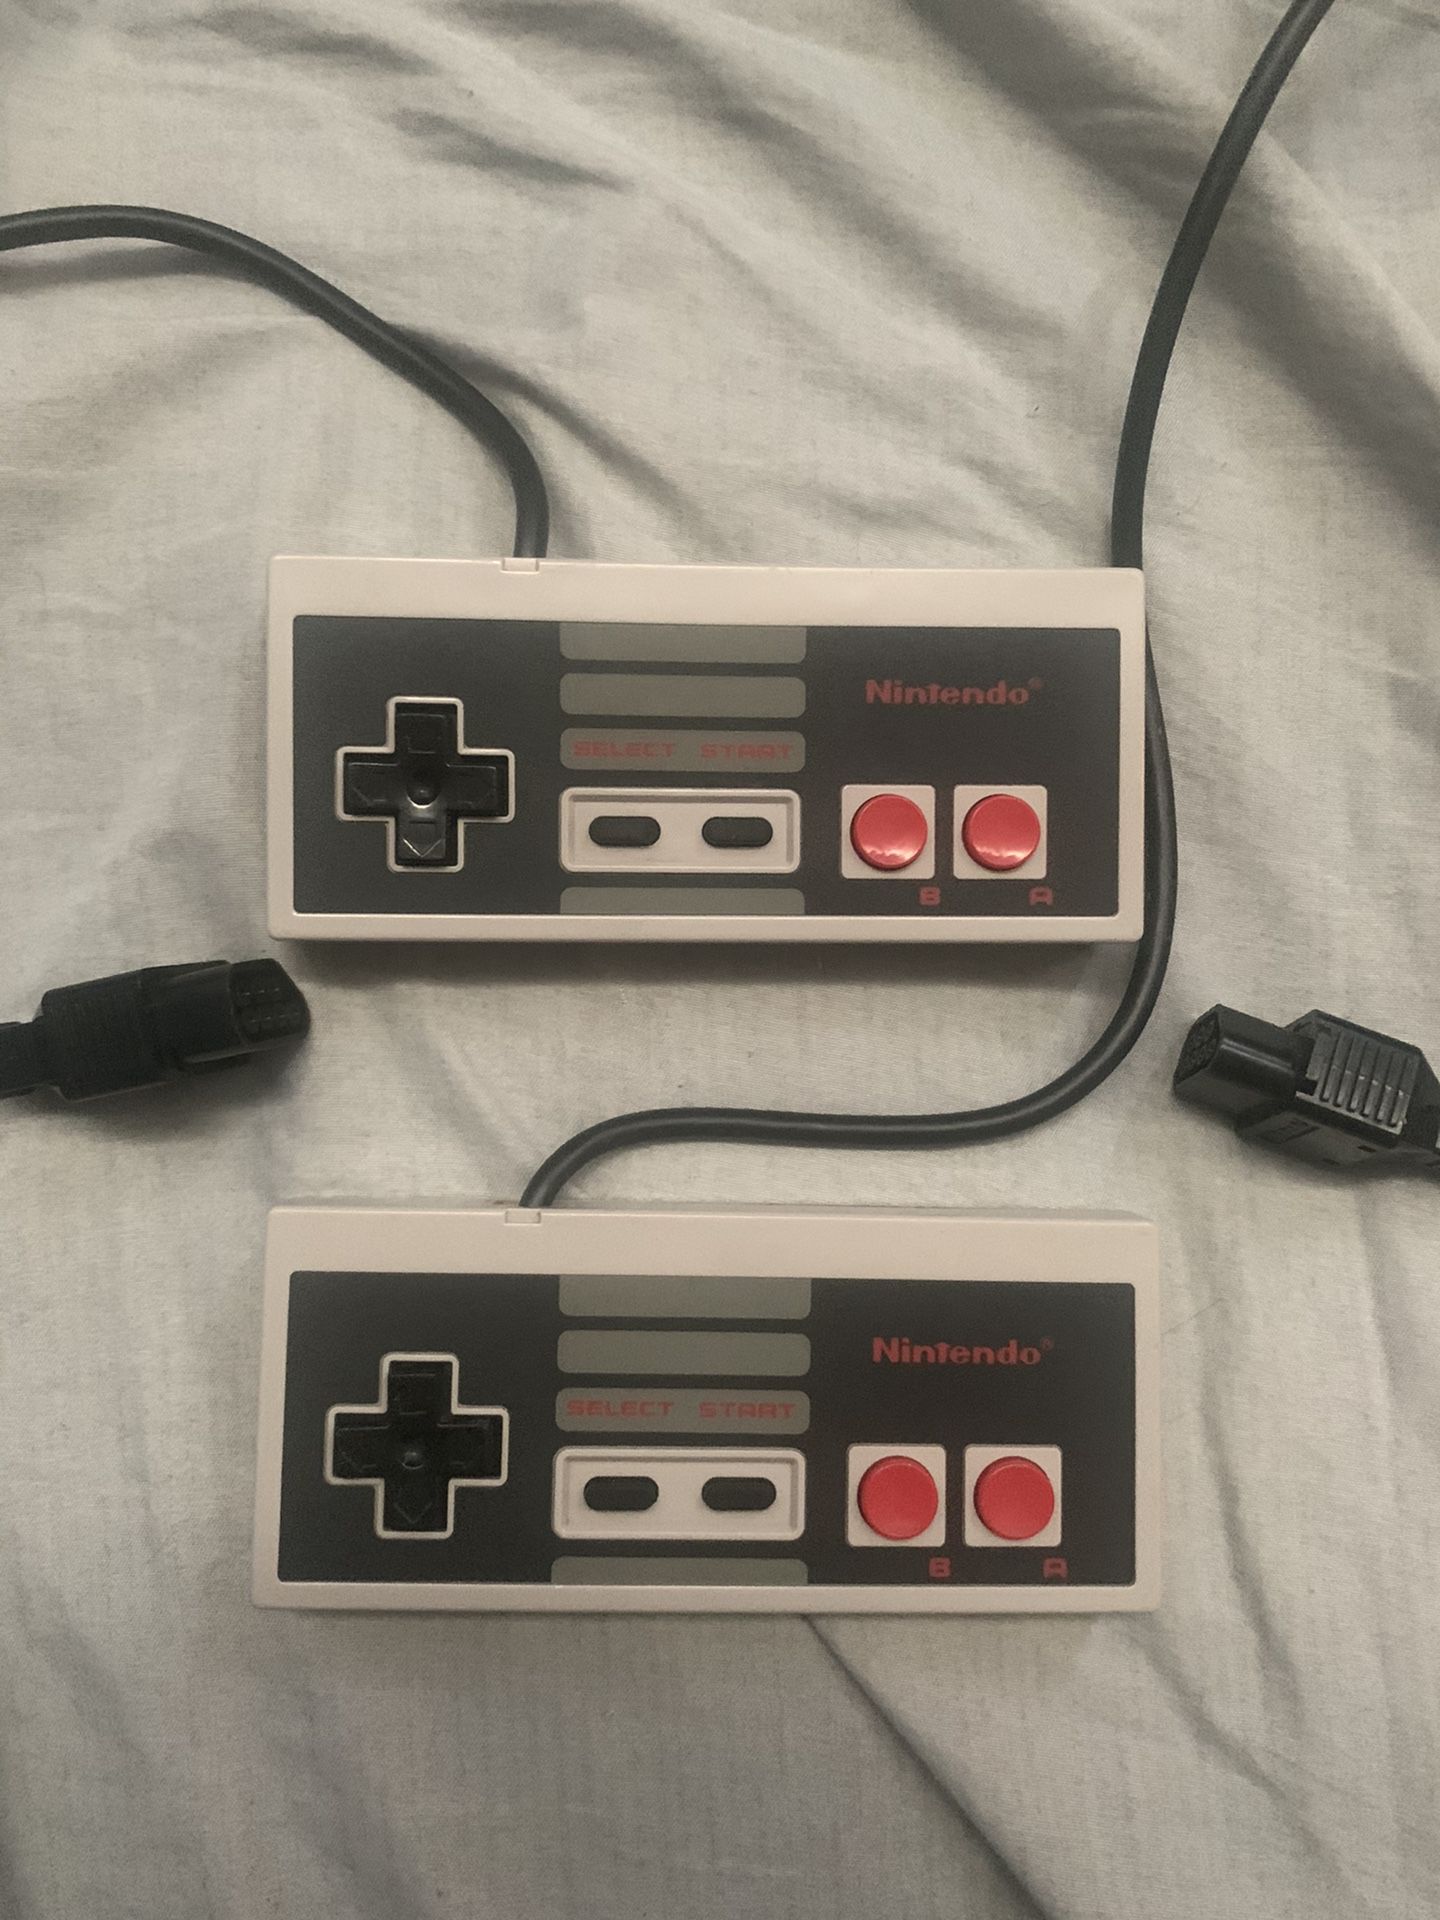 2 NES Remote controllers